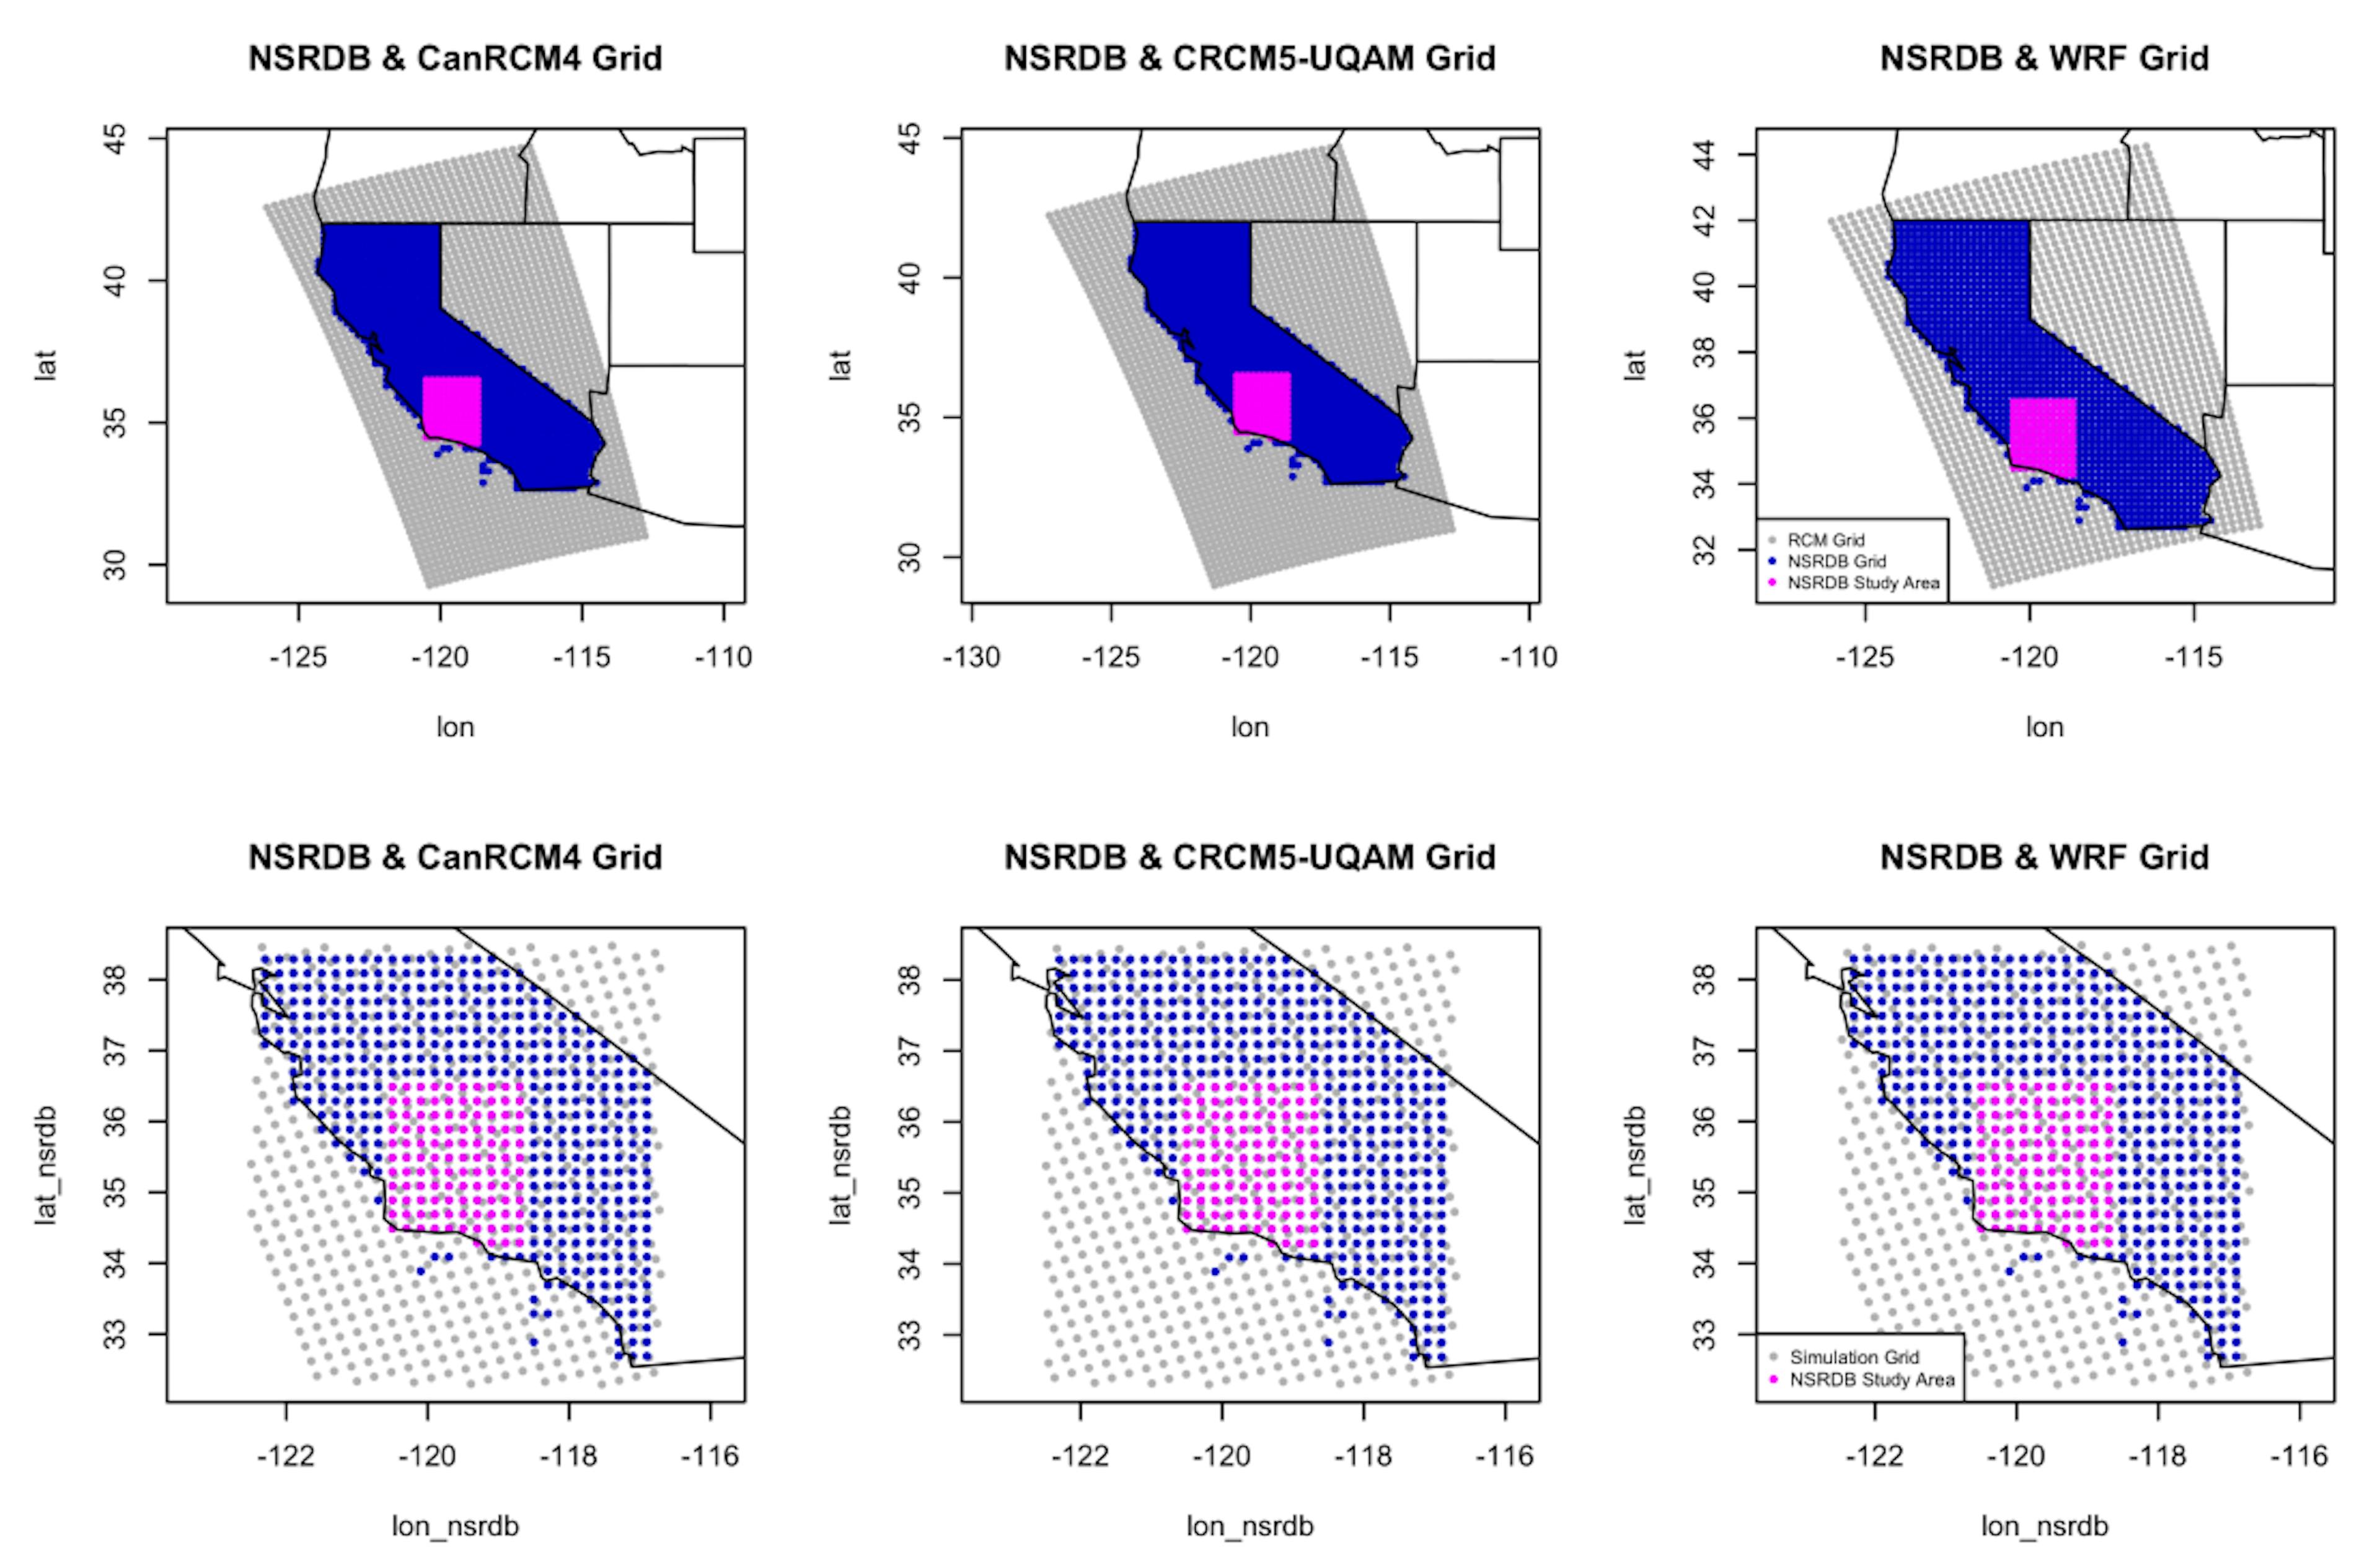 Figure A1. Top: original RCM grid for the three RCMs used in the regridding study plotted with NSRDB grid in blue. Magenta points represent the study area from the regridding study in the main text. Bottom: subsetted grids used in the simulation study.